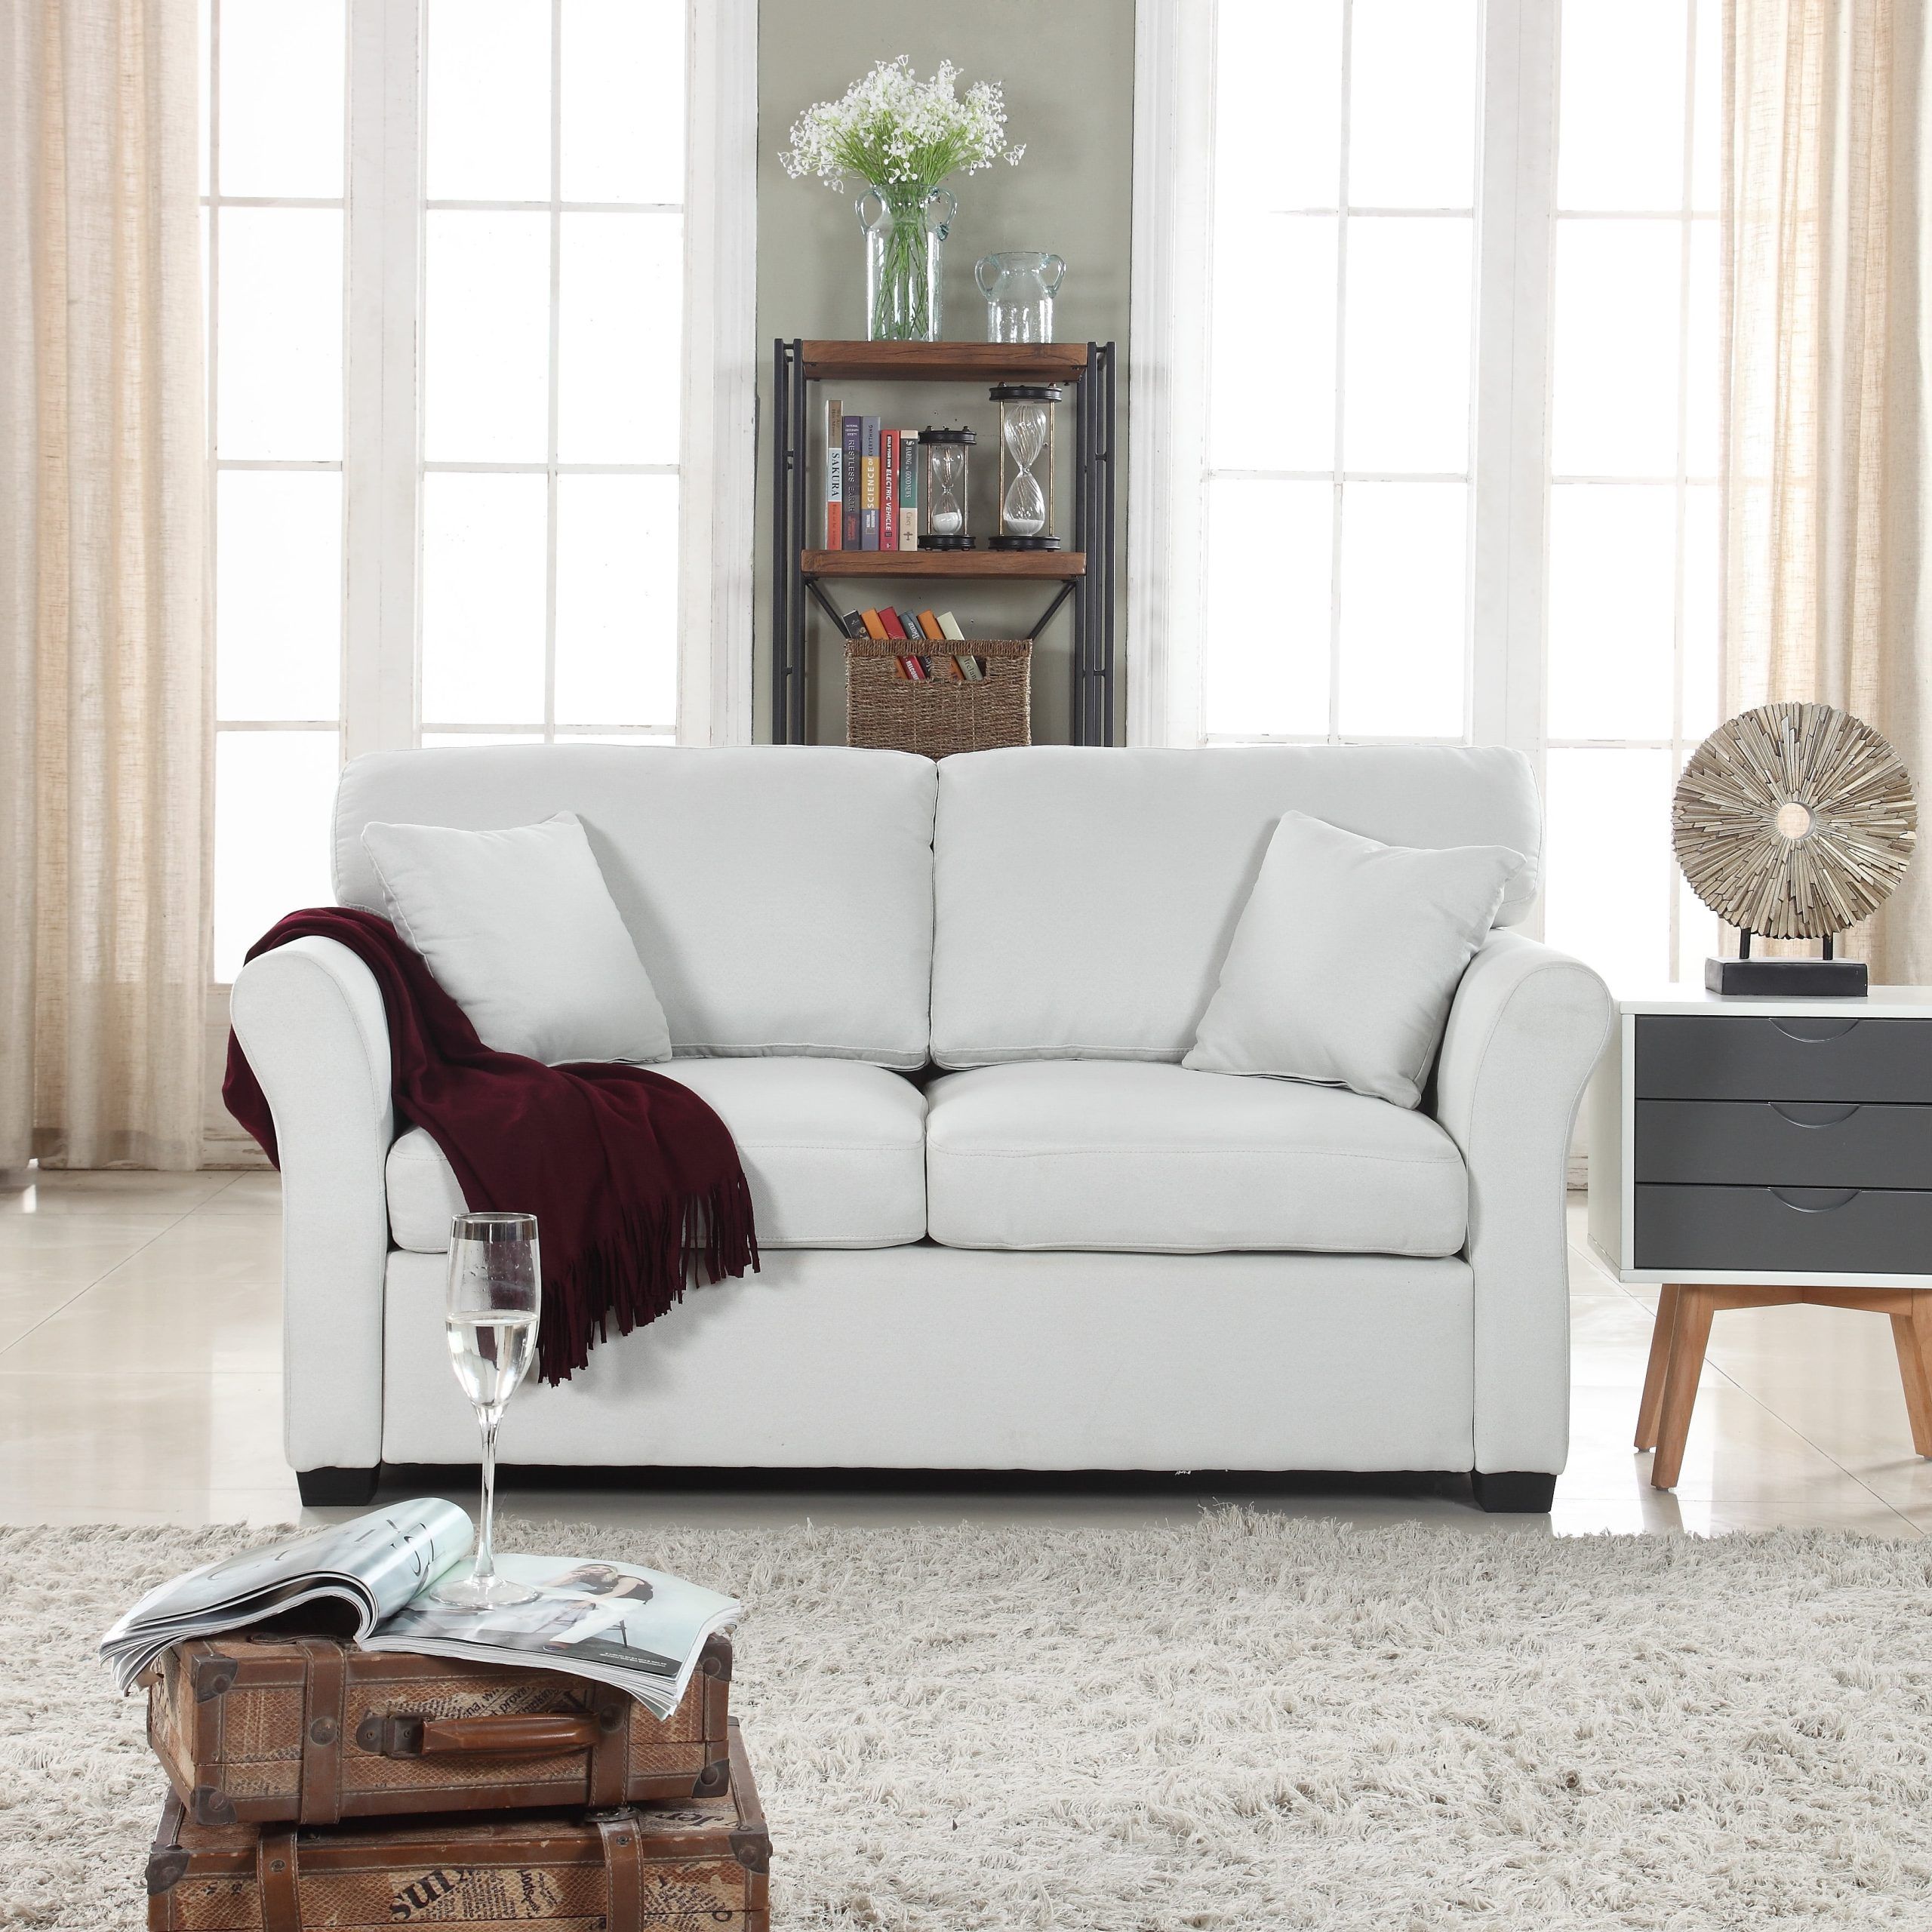 Classic And Traditional Comfortable Linen Fabric Loveseat Sofa Living Within Sofas In Beige (View 4 of 20)